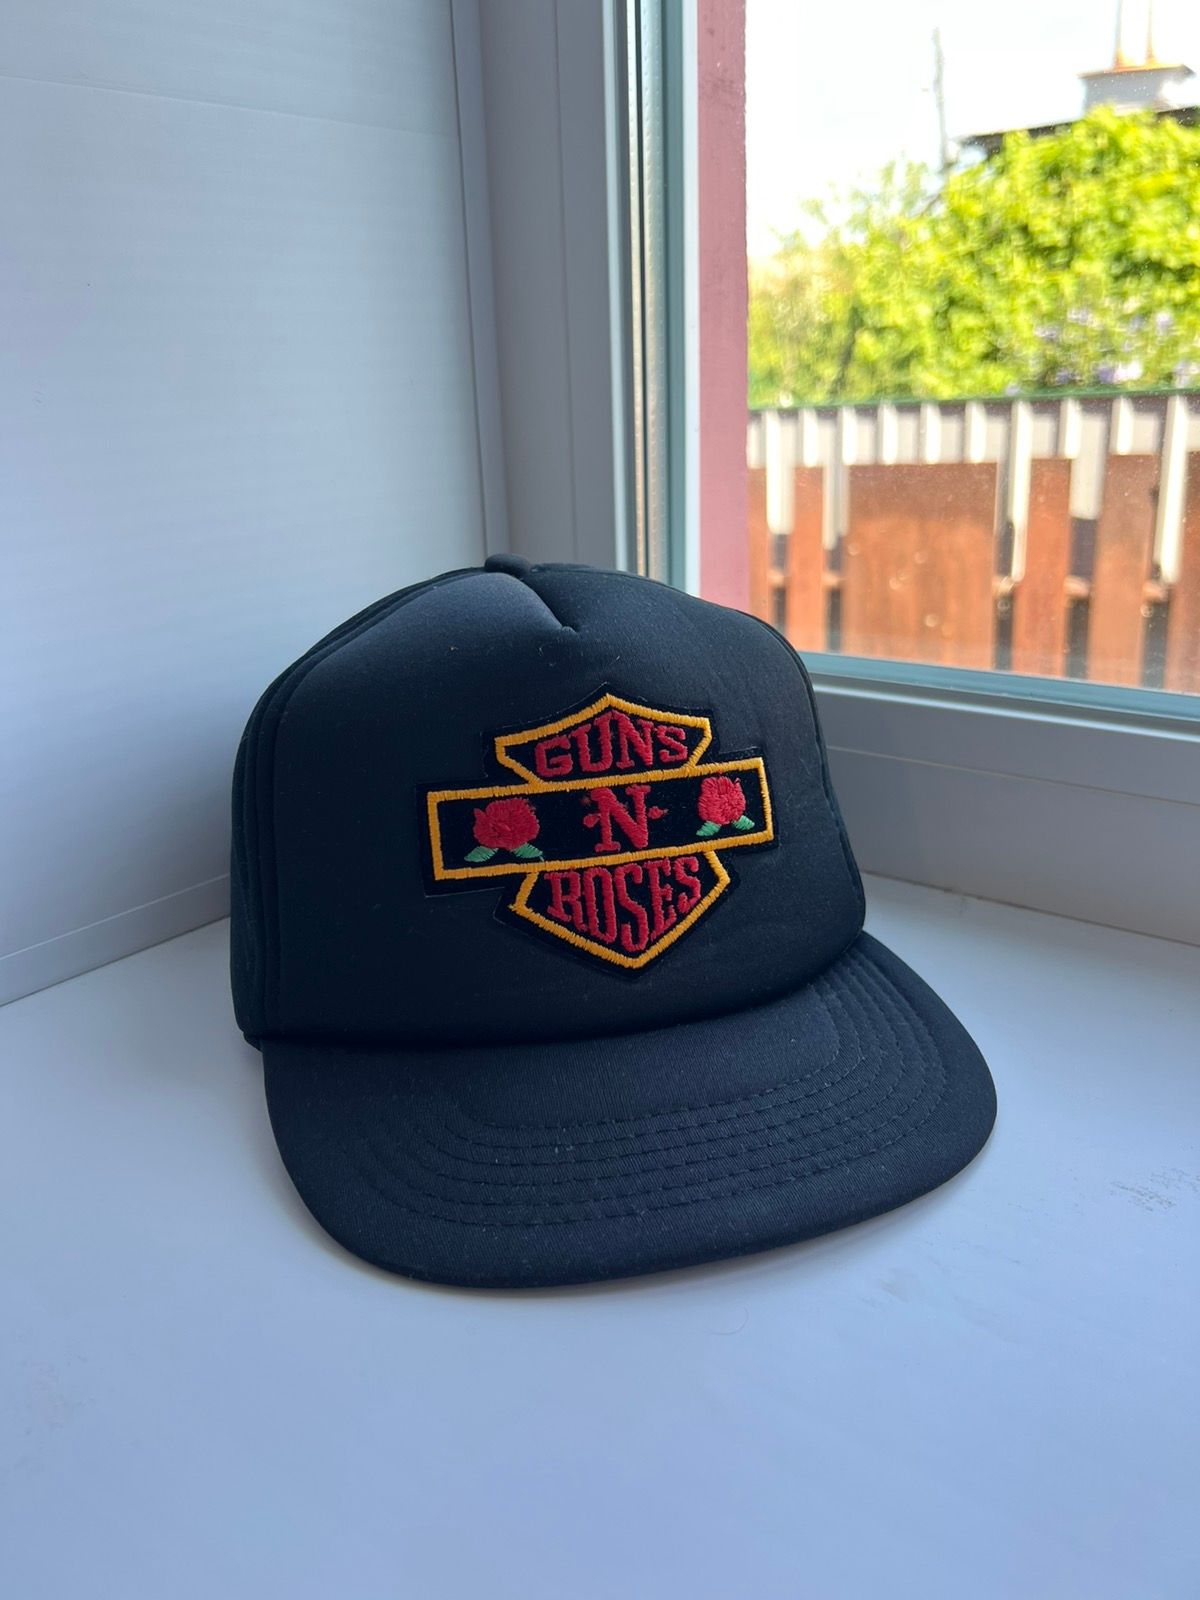 Vintage Vintage 90s Guns N Roses Band Trucker Hat / cap Size ONE SIZE - 1 Preview